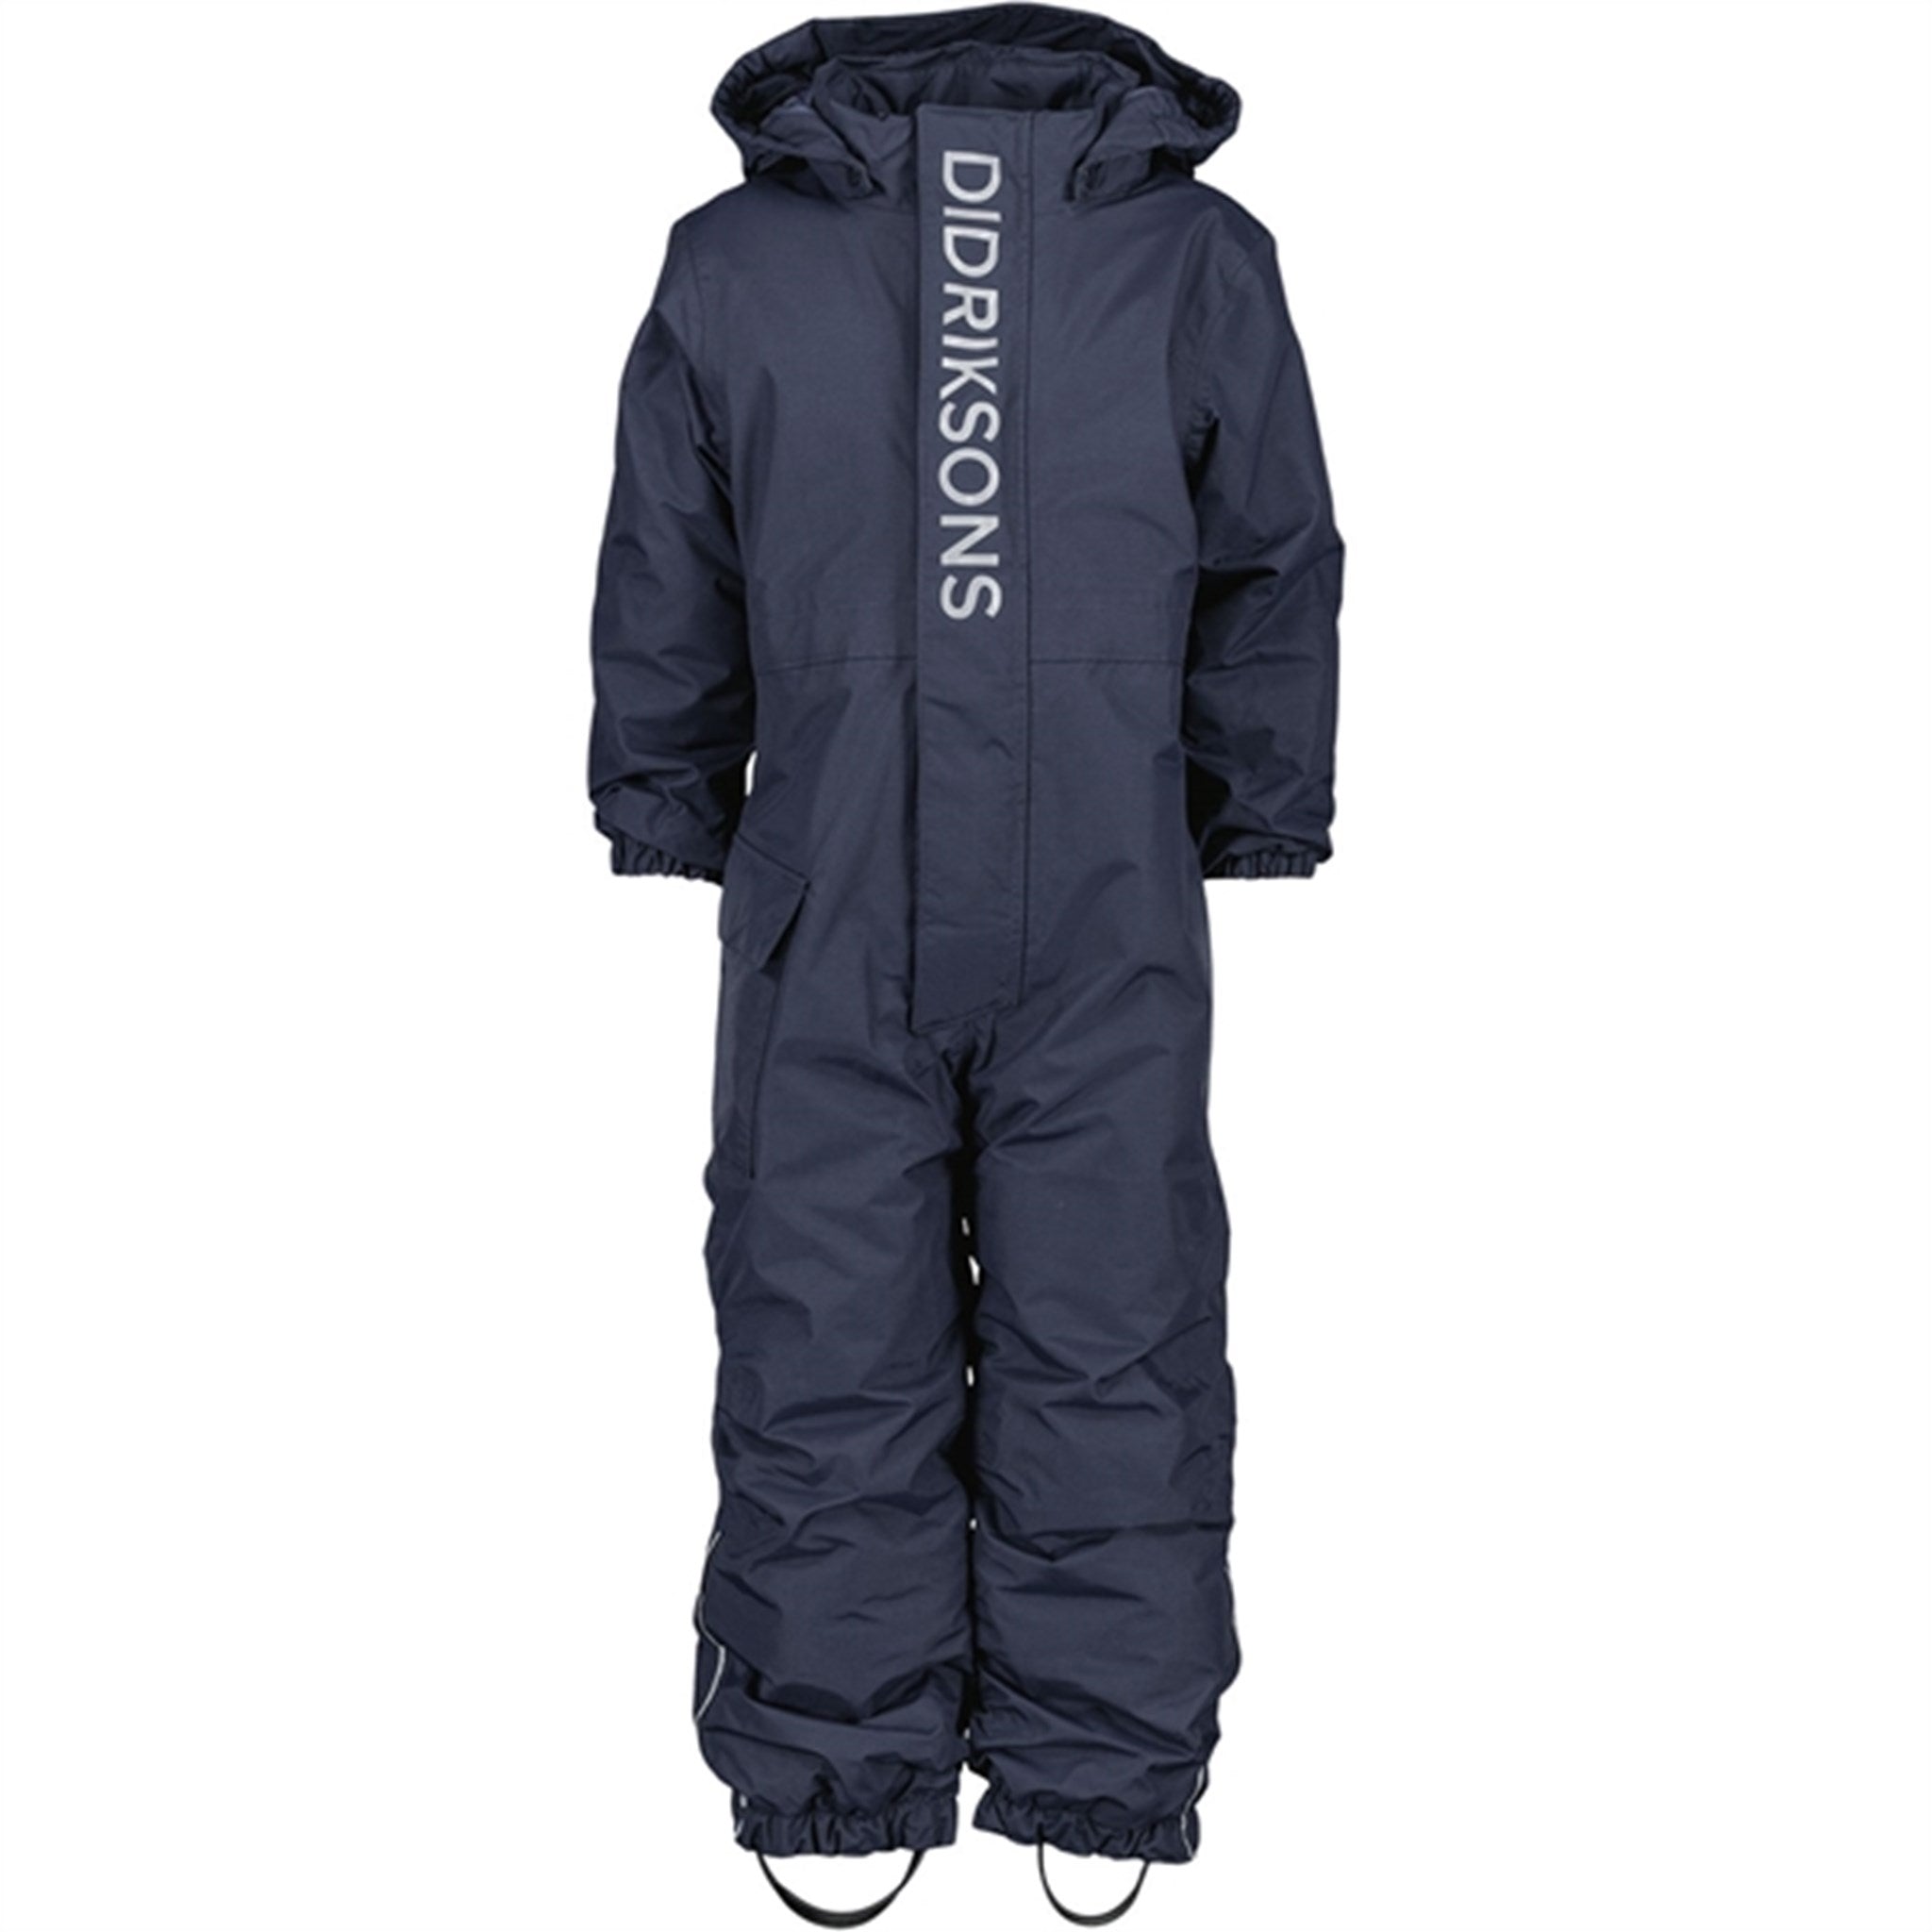 Didriksons Navy Rio Kids Coverall